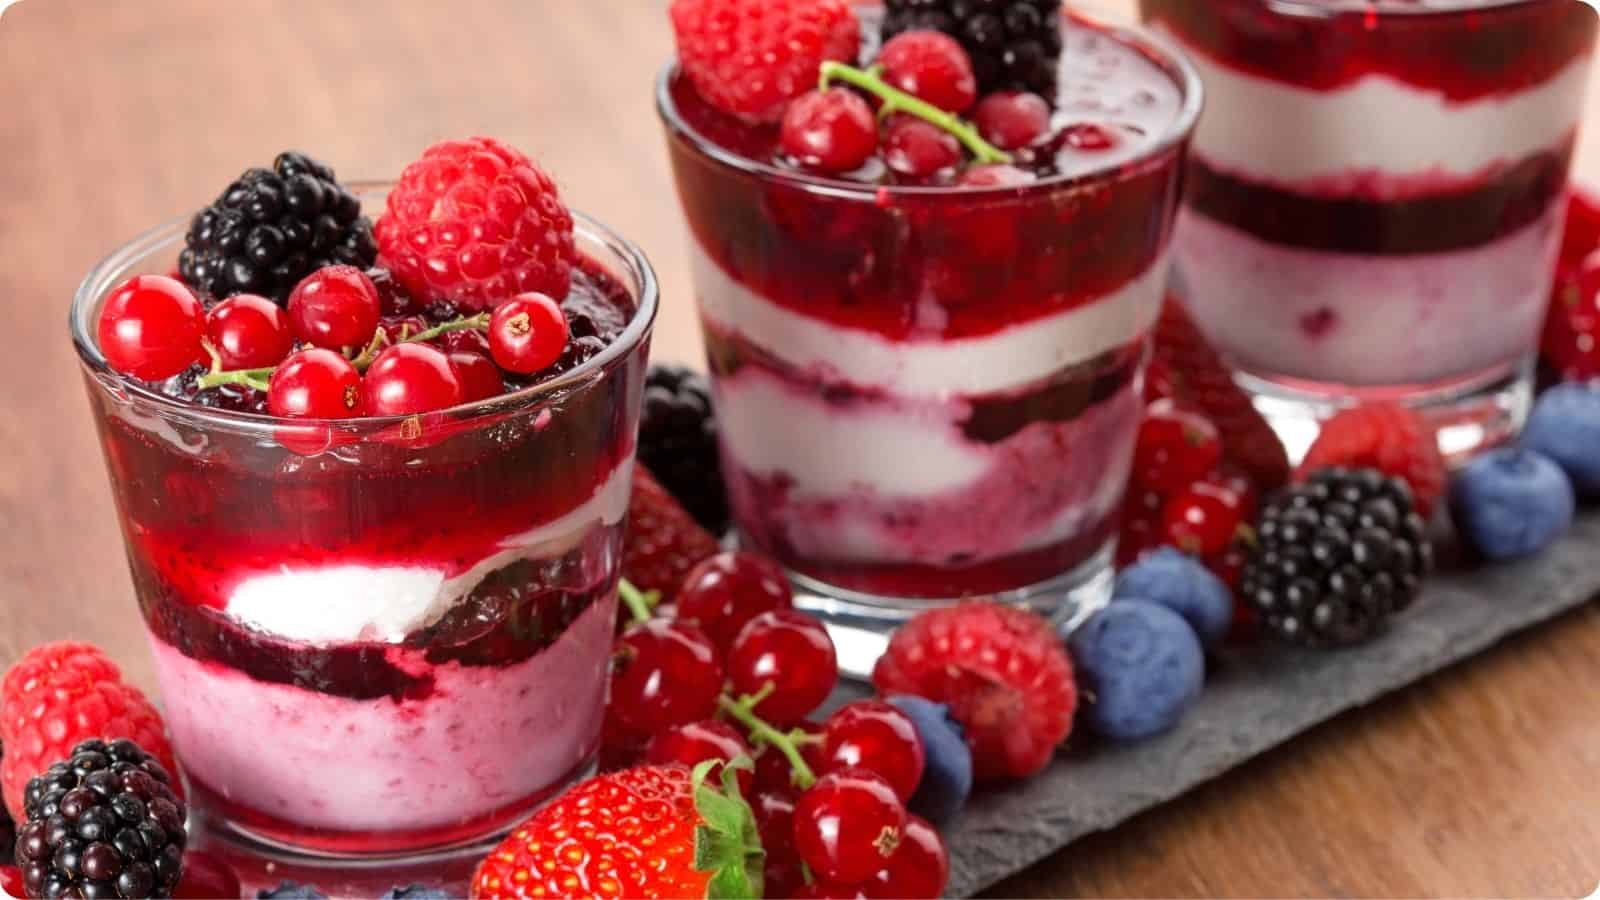 Strawberry yogurt, jam and jelly in a glass serve on the table.